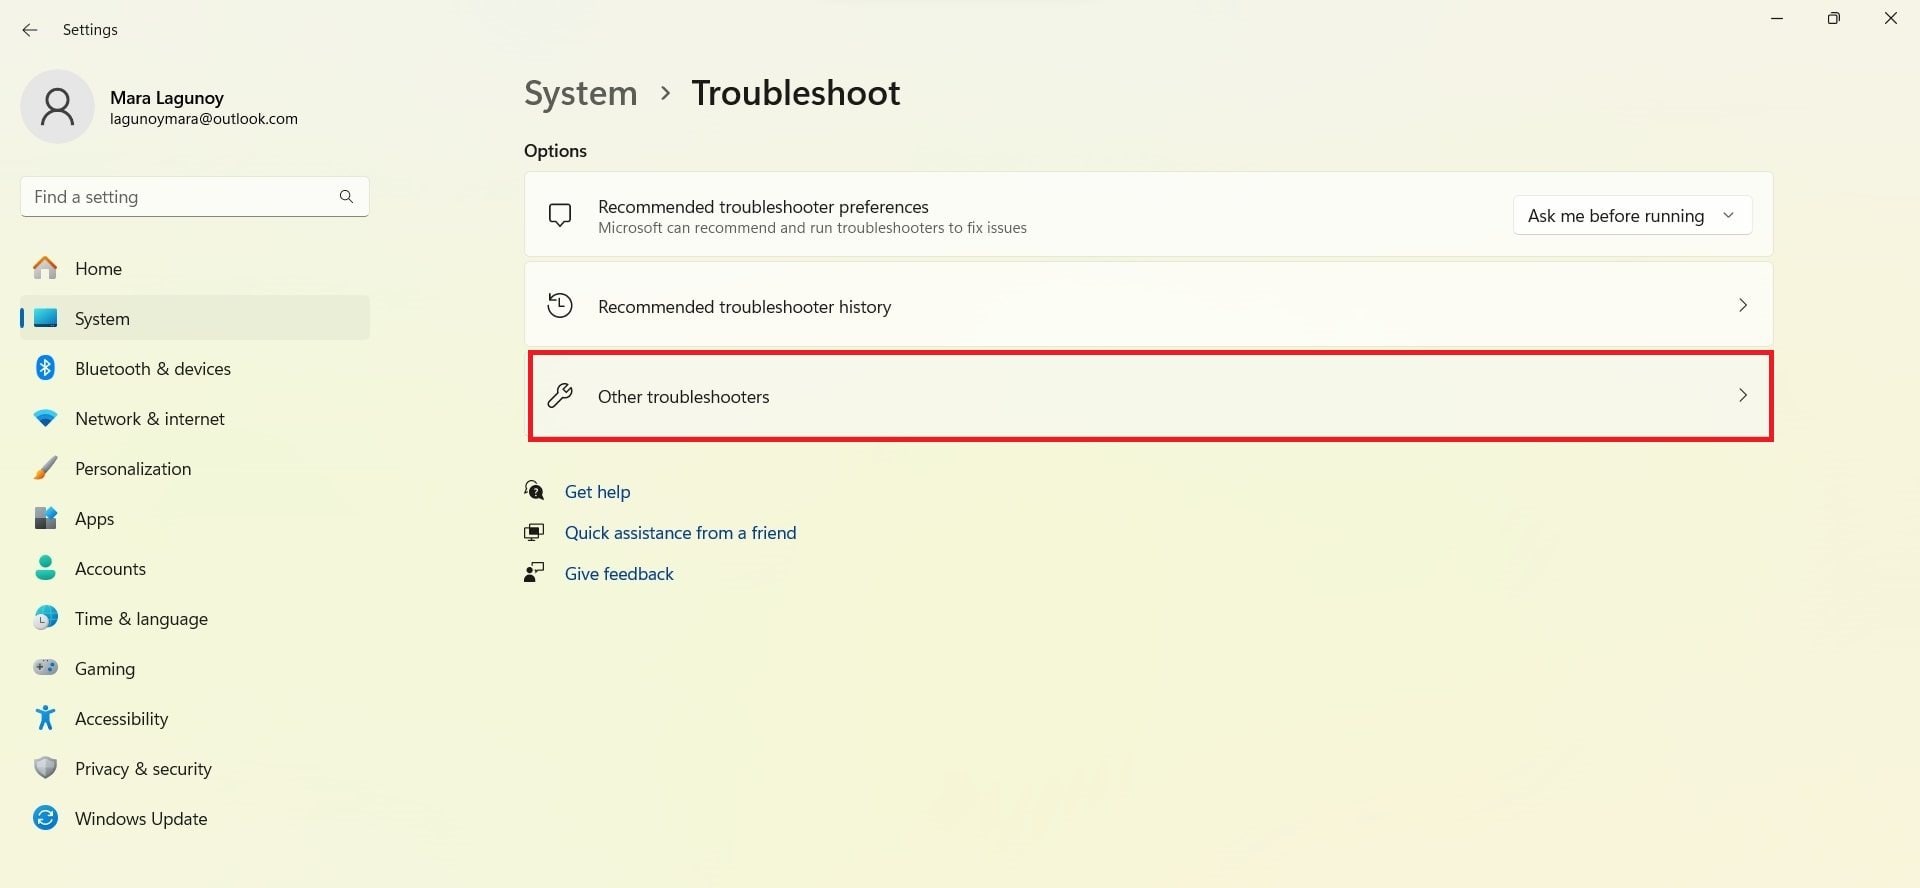 Altri troubleshooter